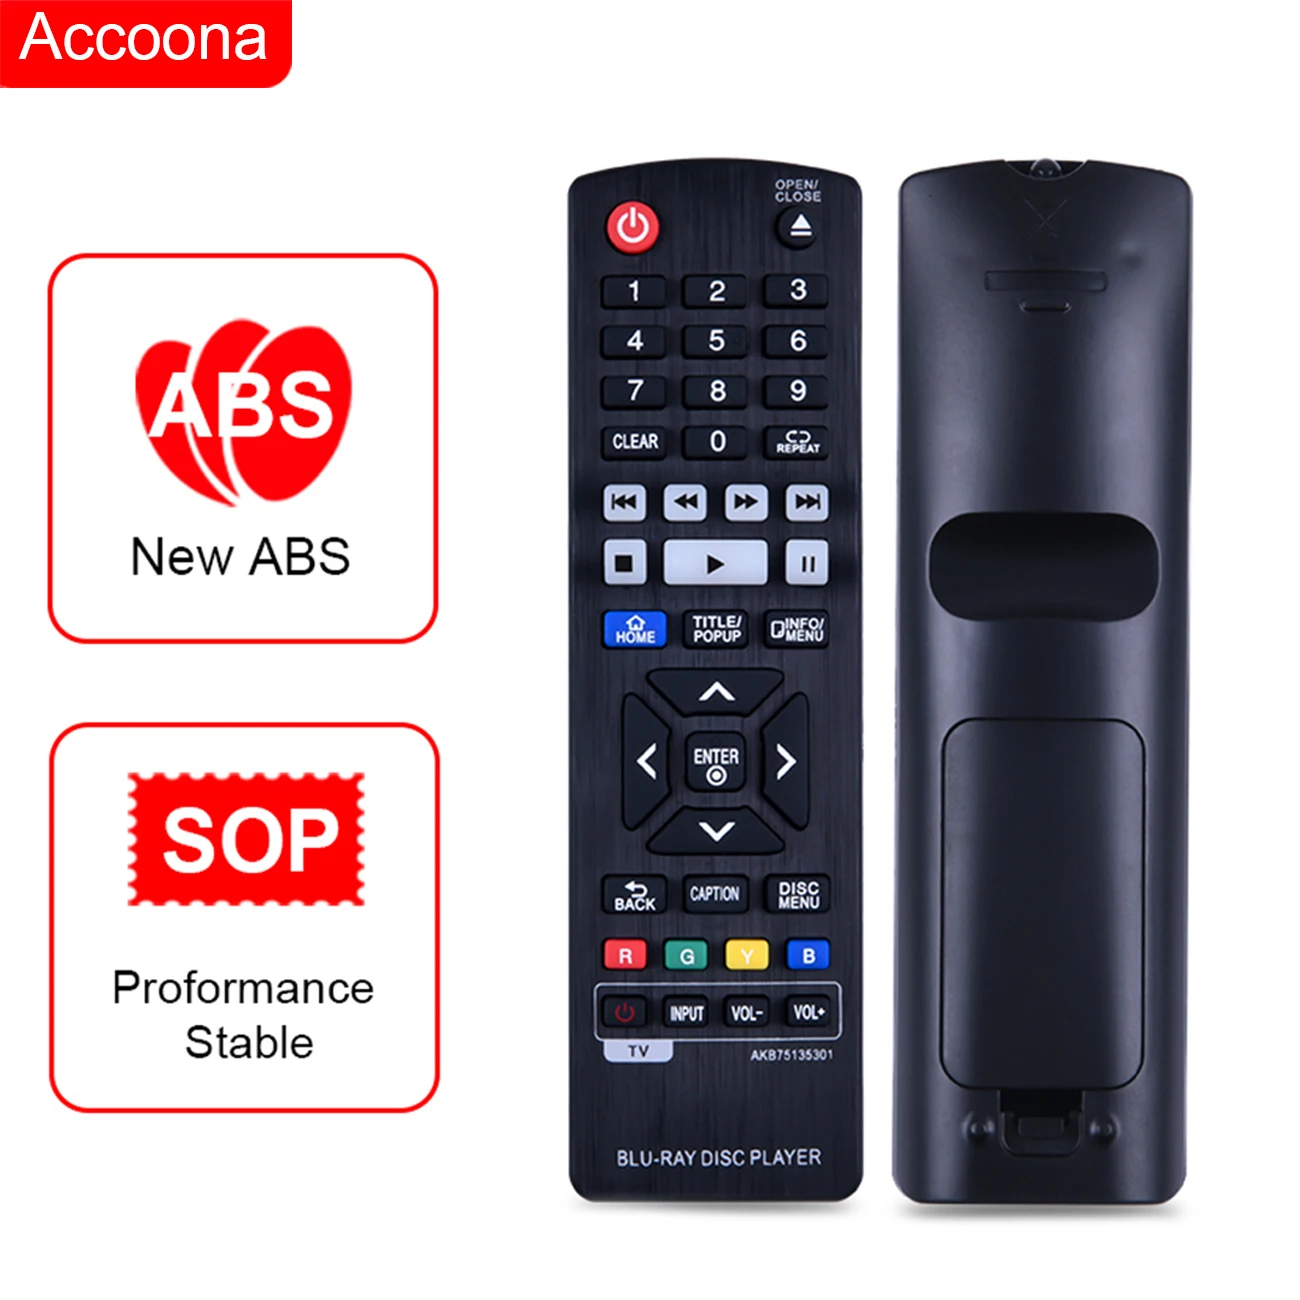 

New AKB75135301 Remote Control fit for LG Blu-ray Disc DVD Player BP330 BP330N BP540 BP540N BP550 BP550N BP630 BP630N BP630S BPM